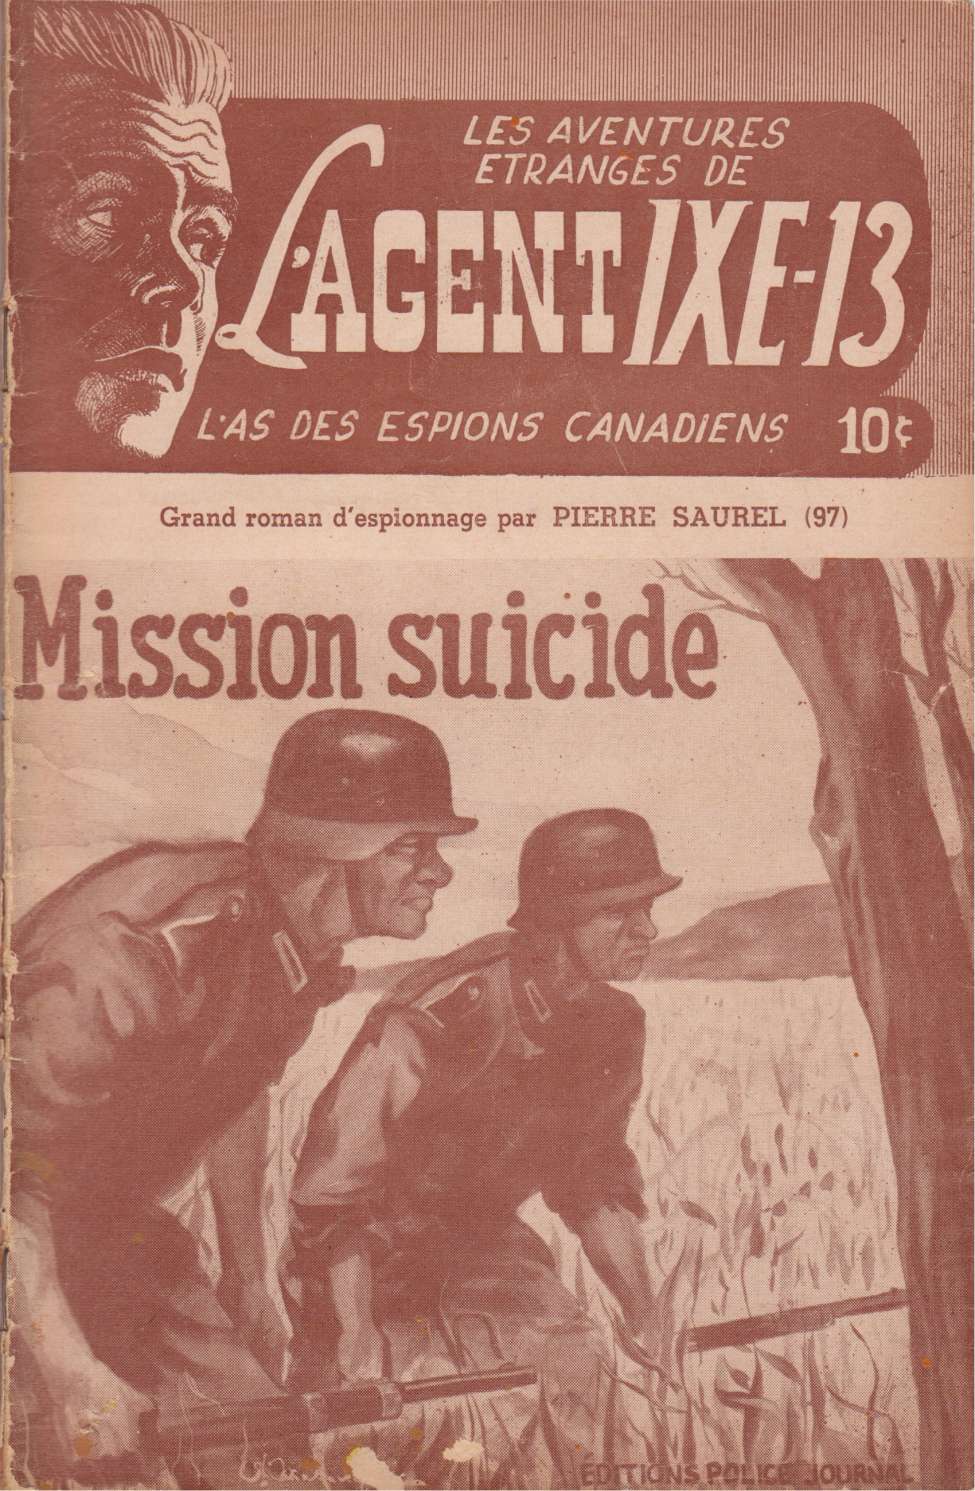 Comic Book Cover For L'Agent IXE-13 v2 97 - Mission suicide